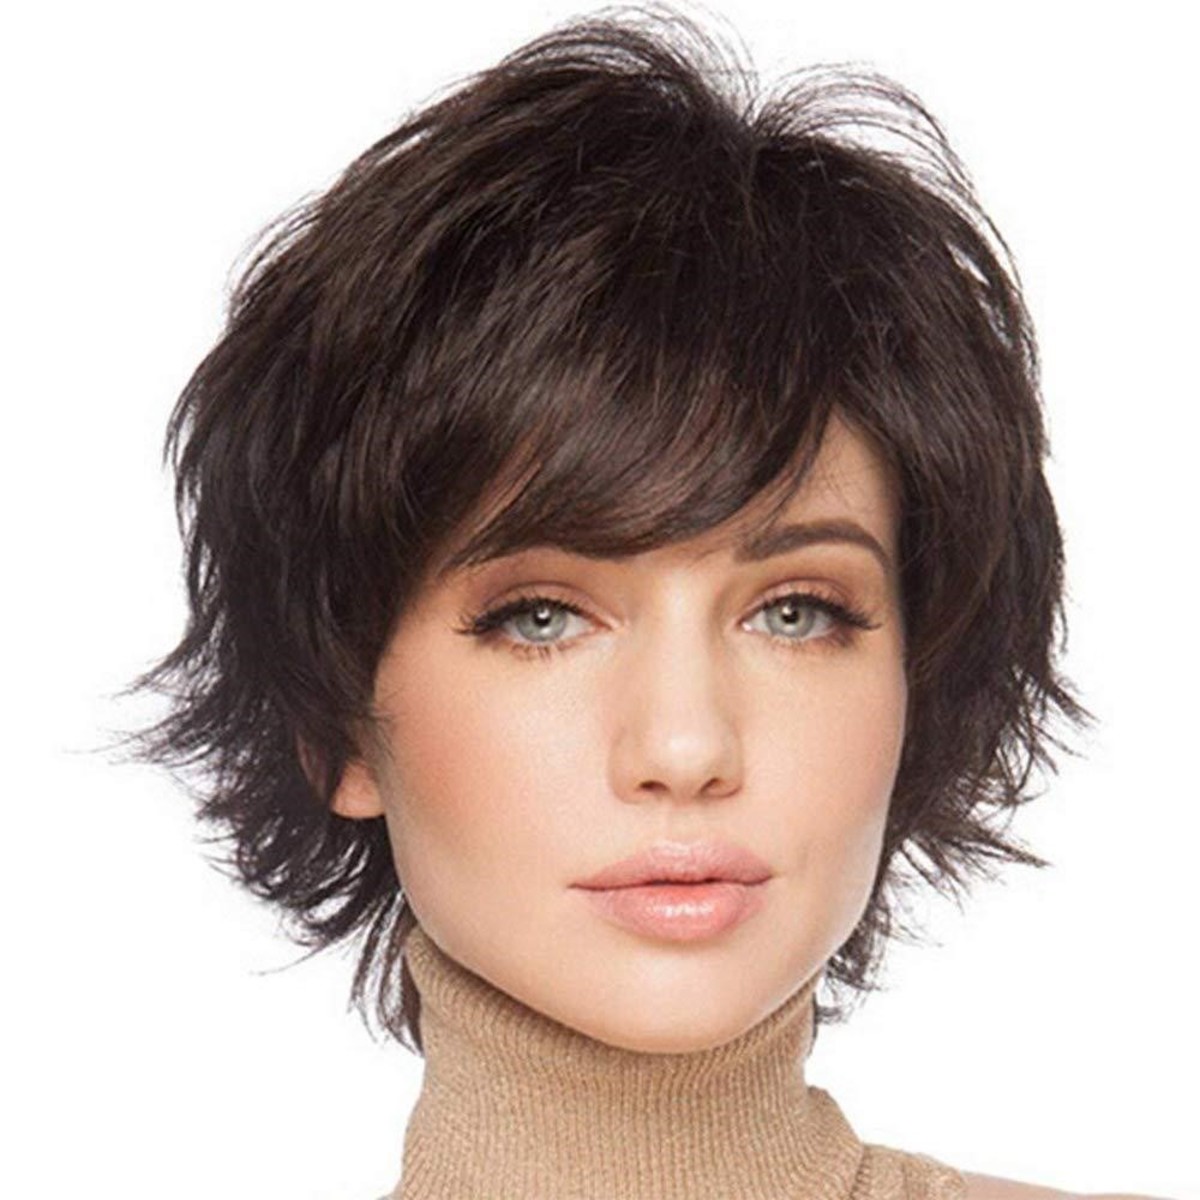 How to Wear Hair Toppers for Thinning Hair?